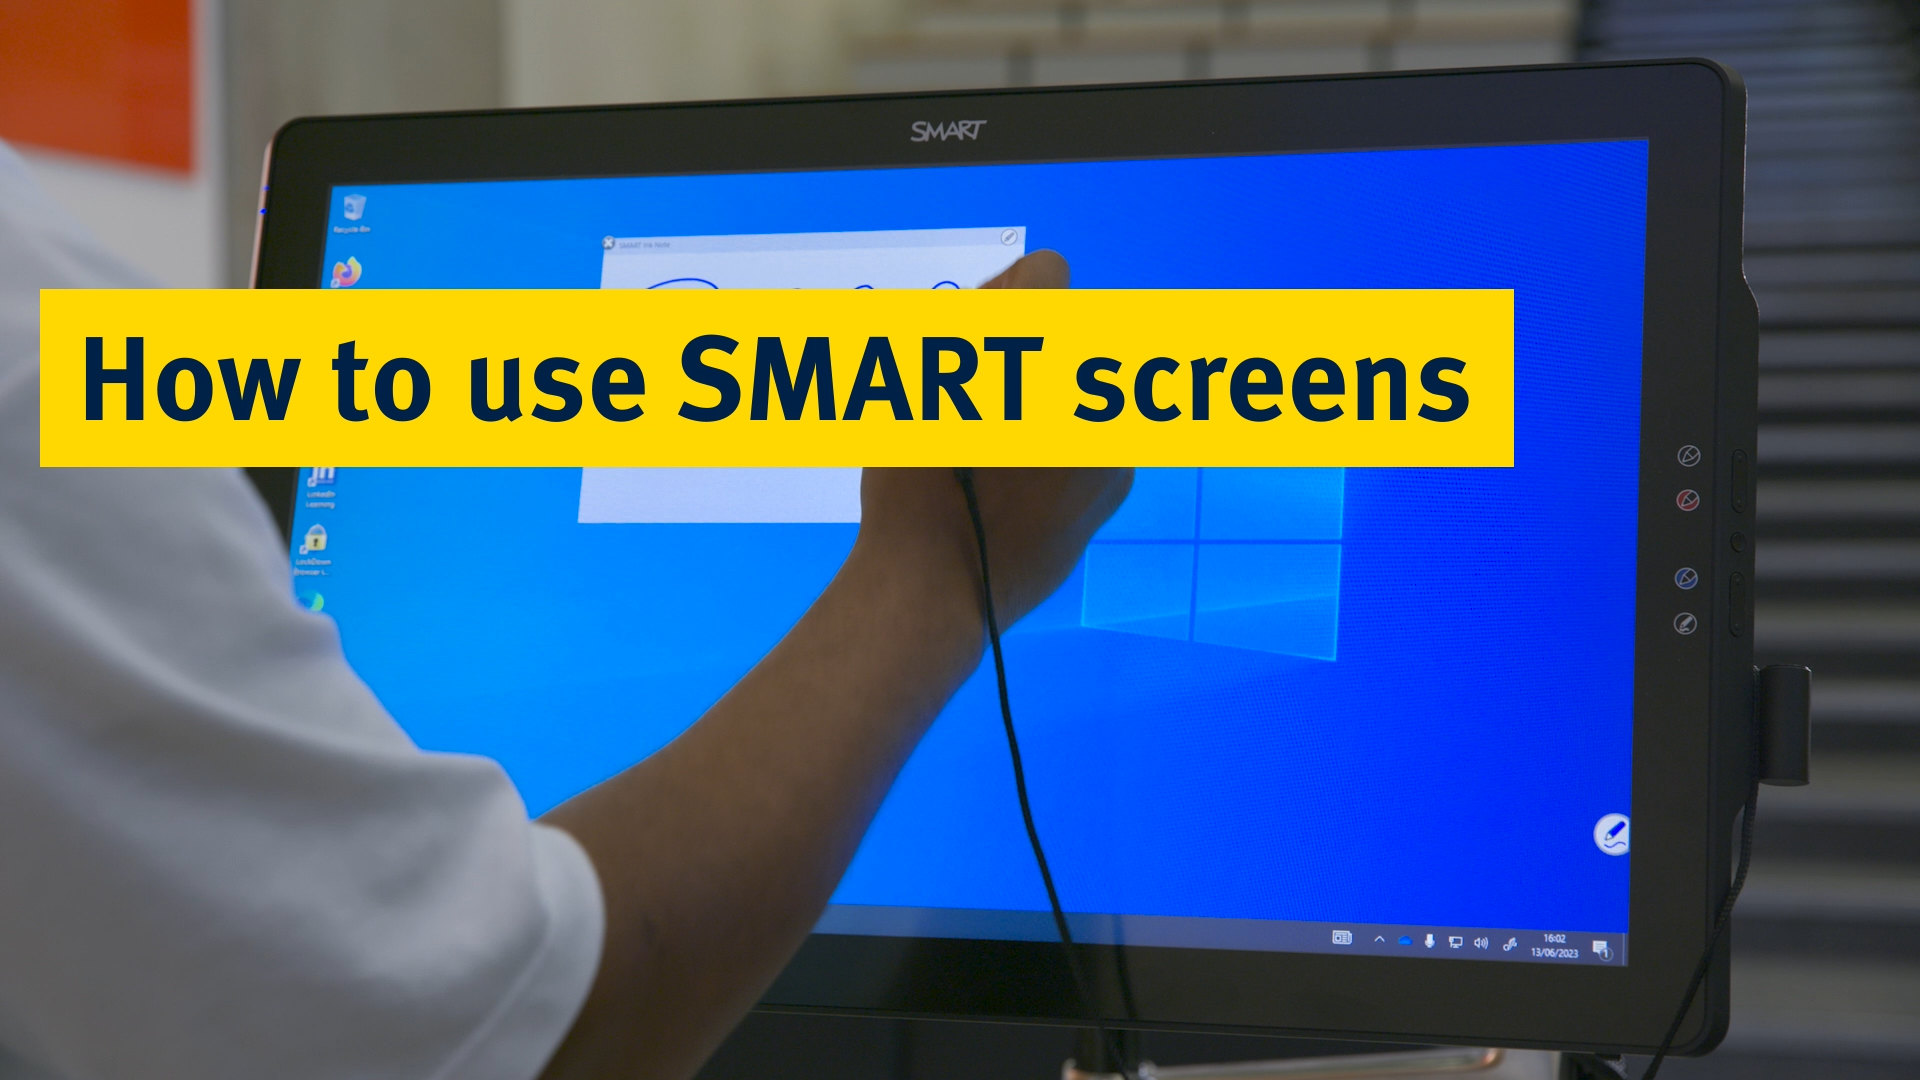 Hhow to use the features of a SMART screen